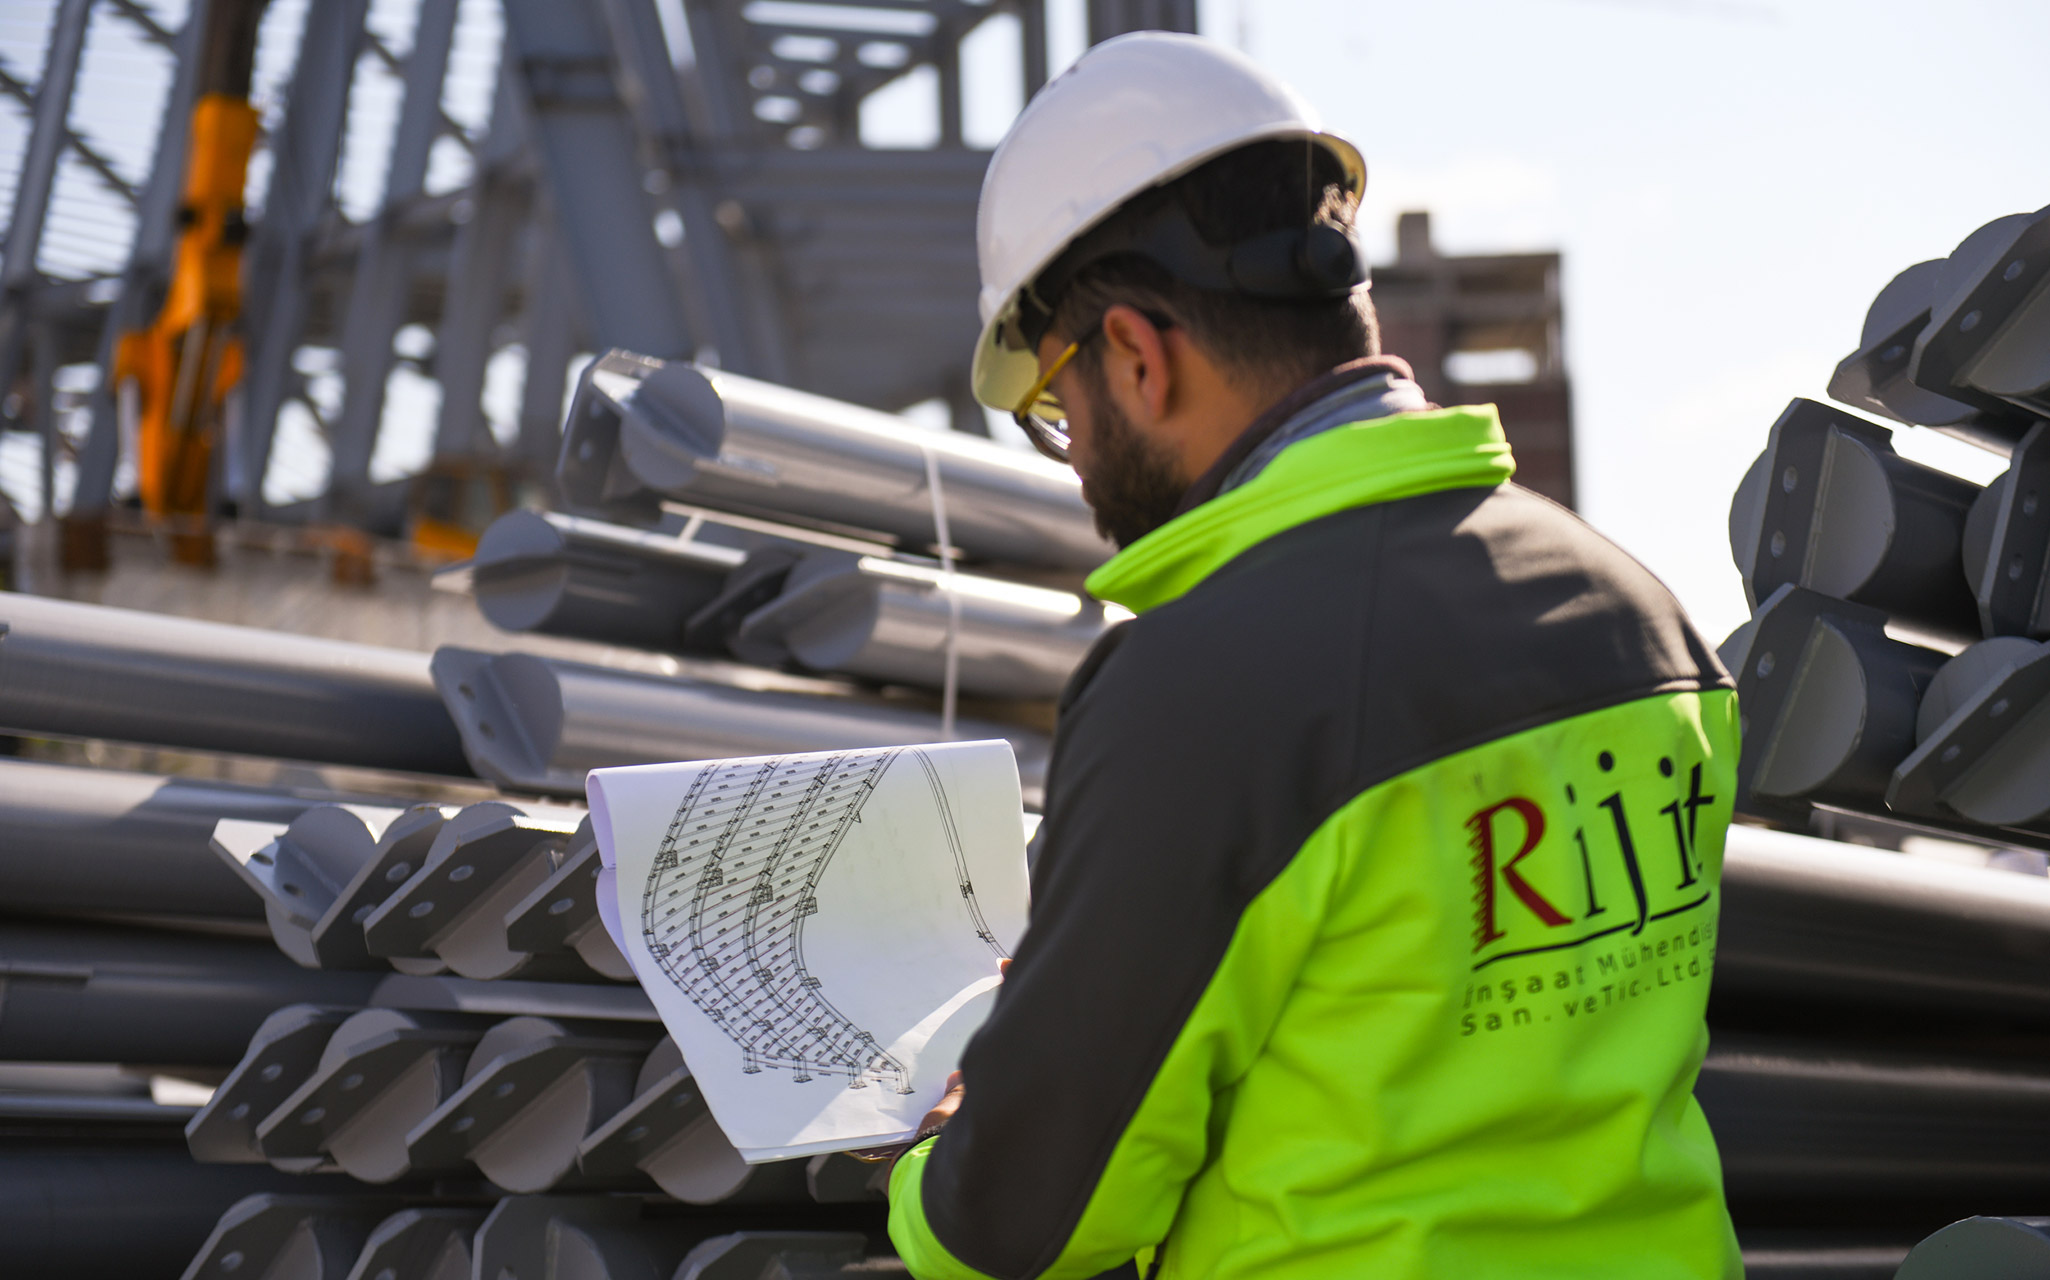 rijit structural steel construction